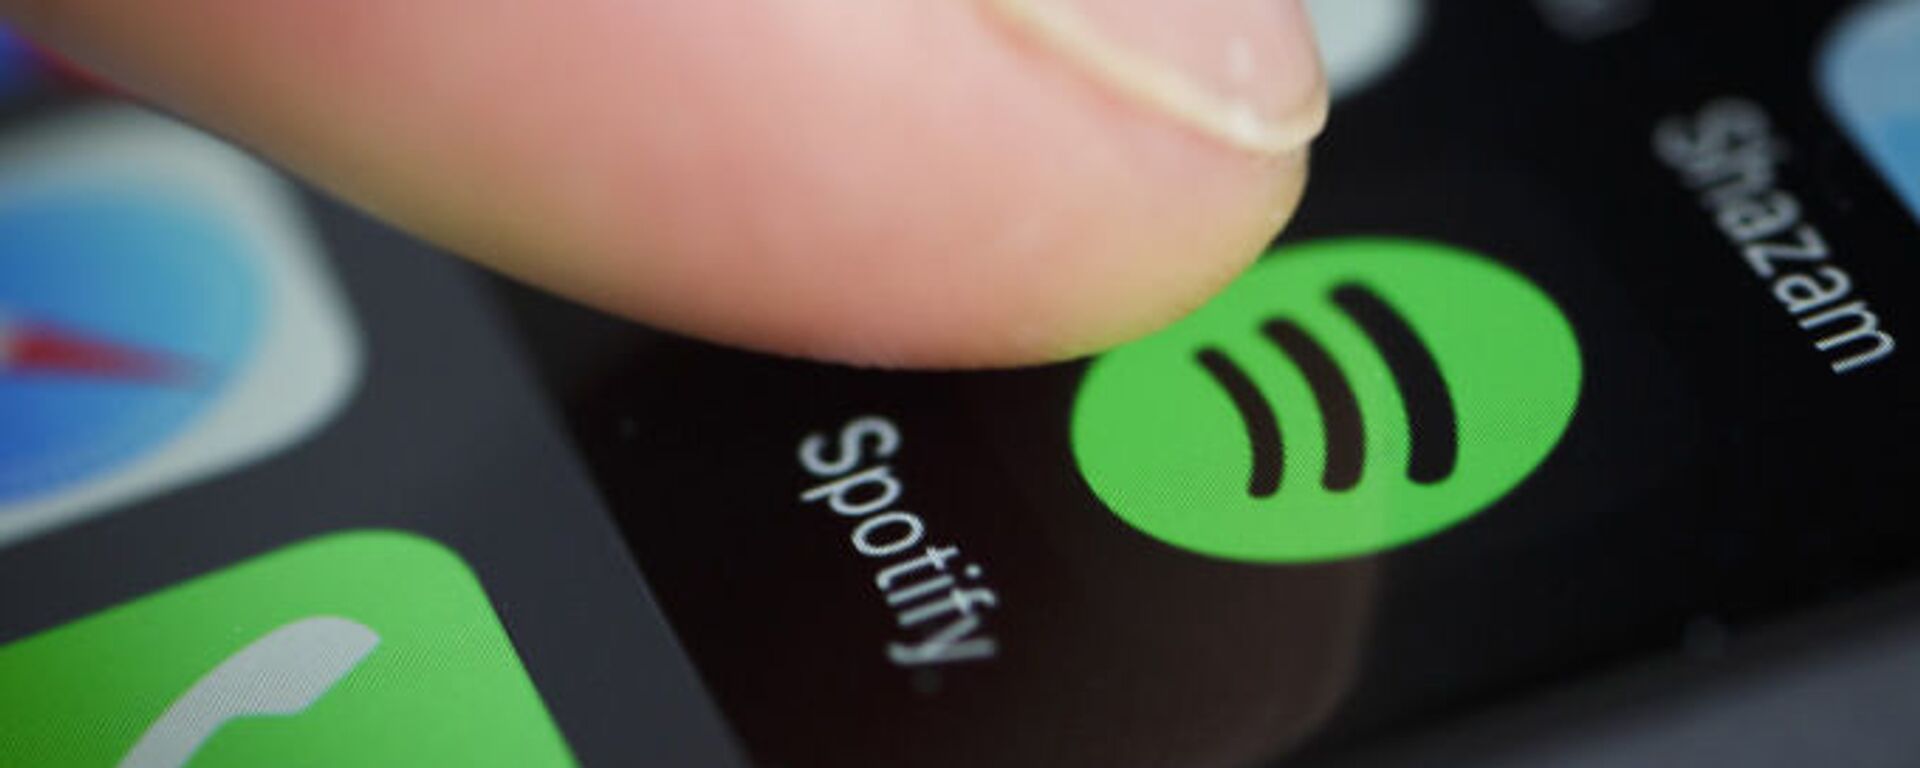 The Logo of streeming service Spotify is displayed on the screen of a smartphone on January 21, 2016 in Berlin, Germany - Sputnik International, 1920, 29.01.2022